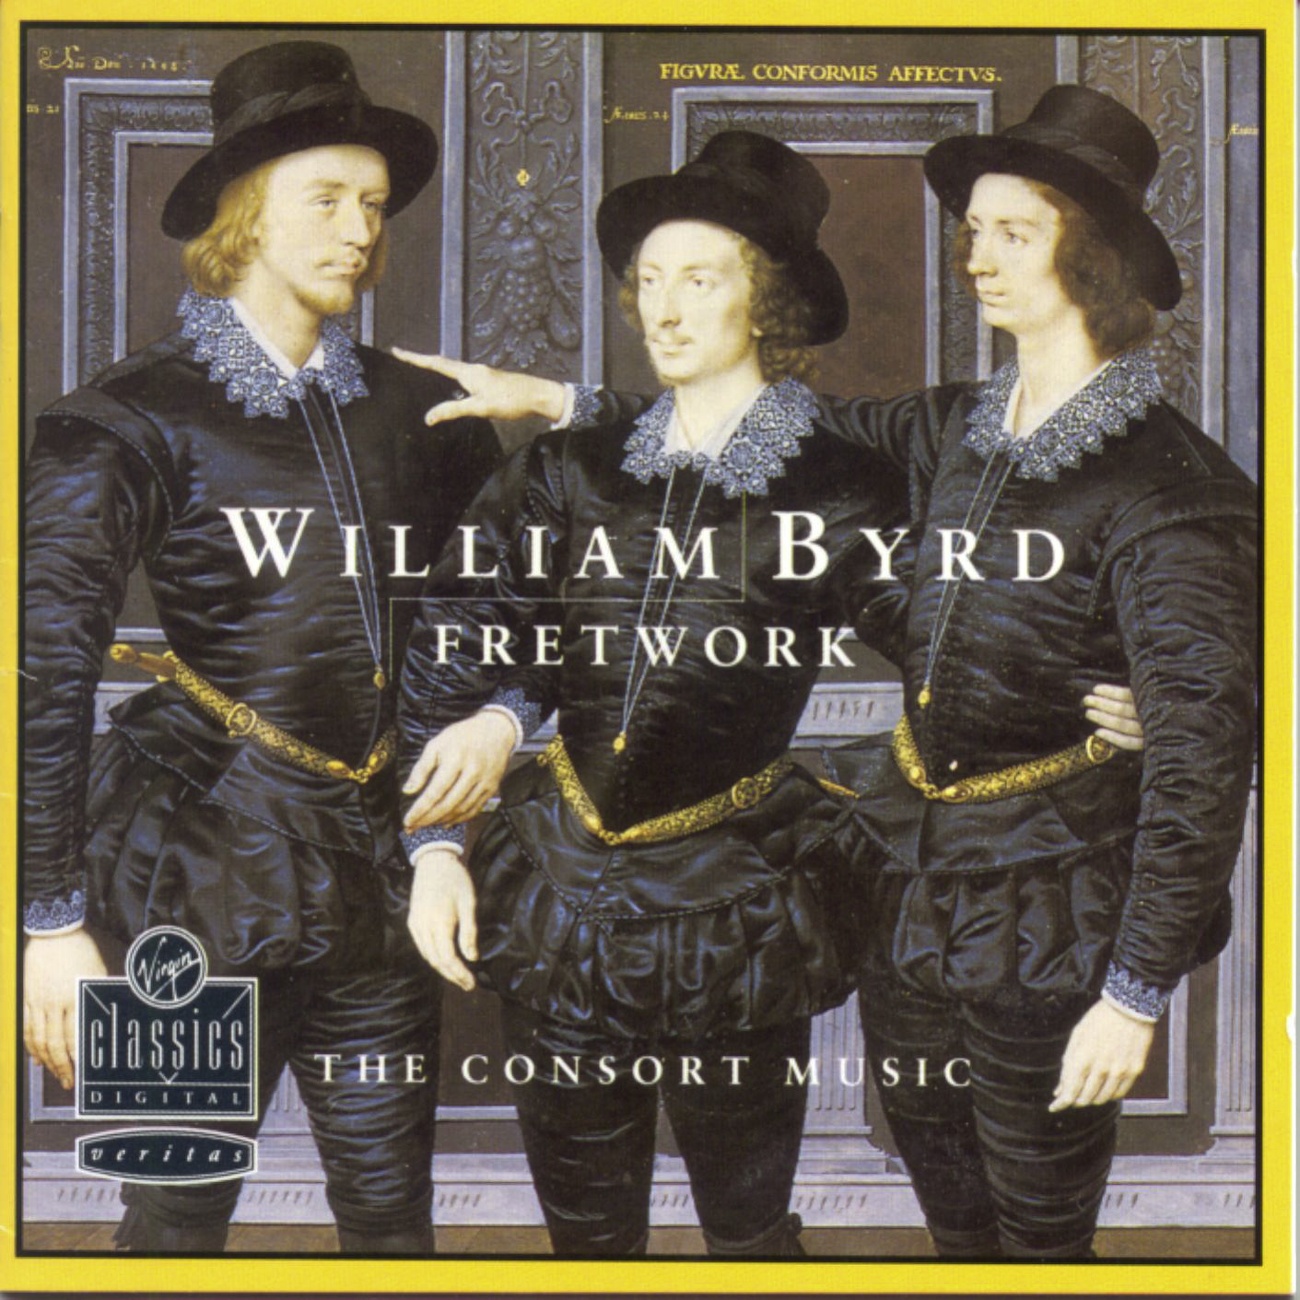 The Complete Consort Music